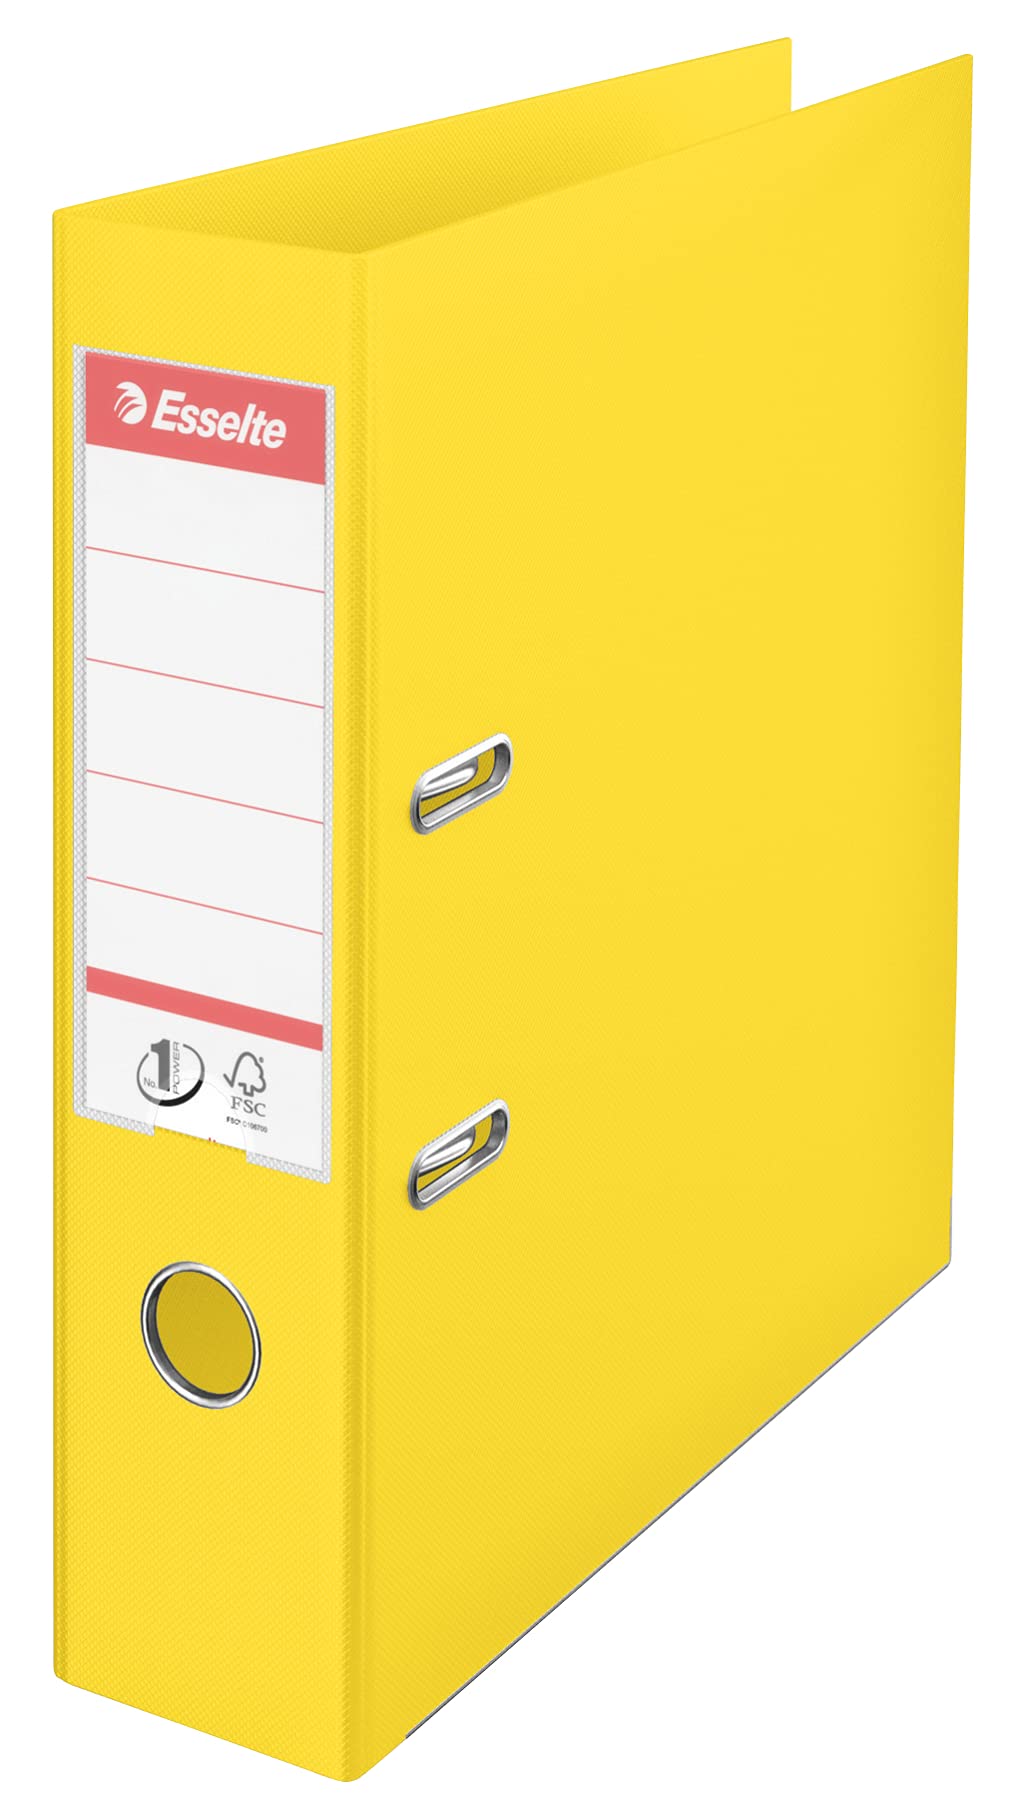 Esselte No.1 VIVIDA A4 Plastic Lever Arch File 75mm Yellow Pack of 10 (624070-10)